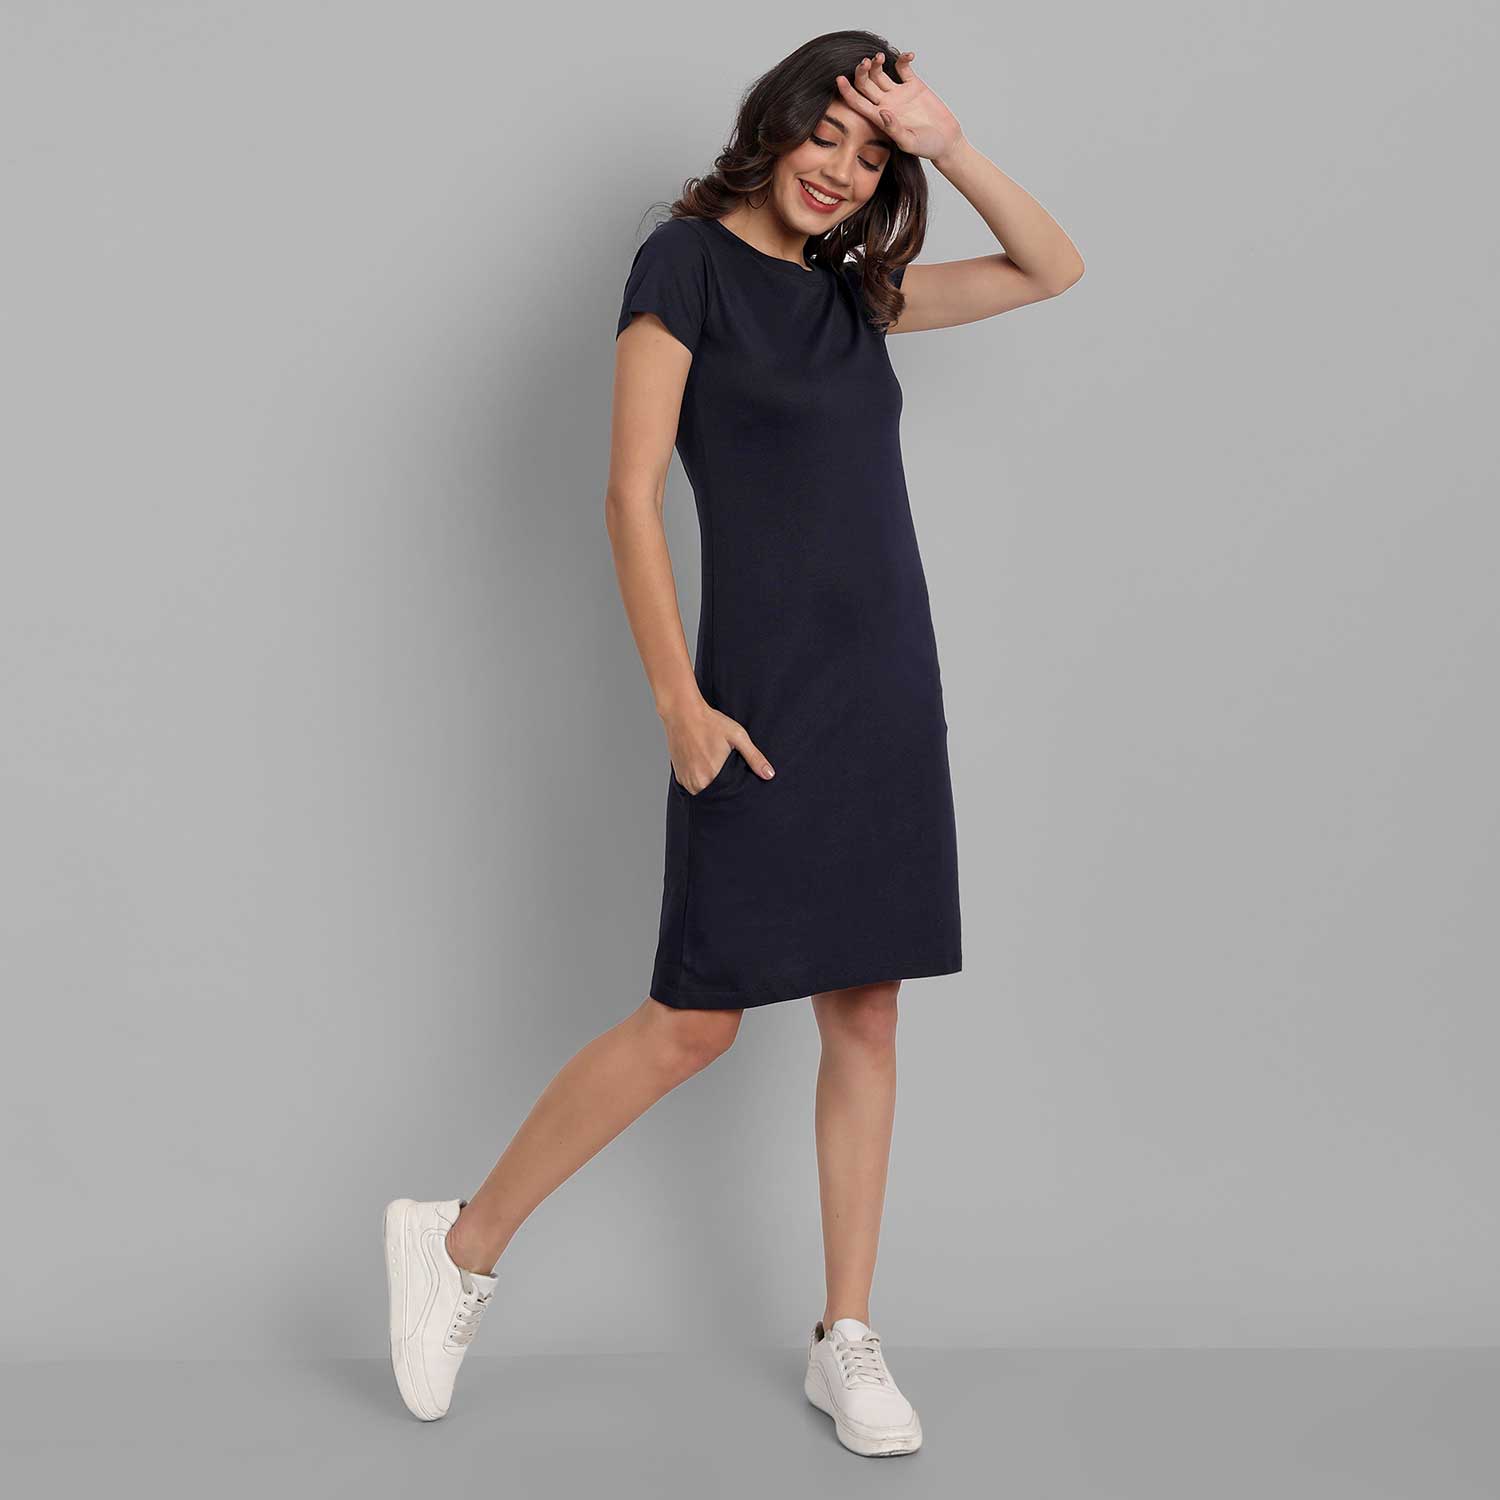 Navy Blue Dresses For Woman